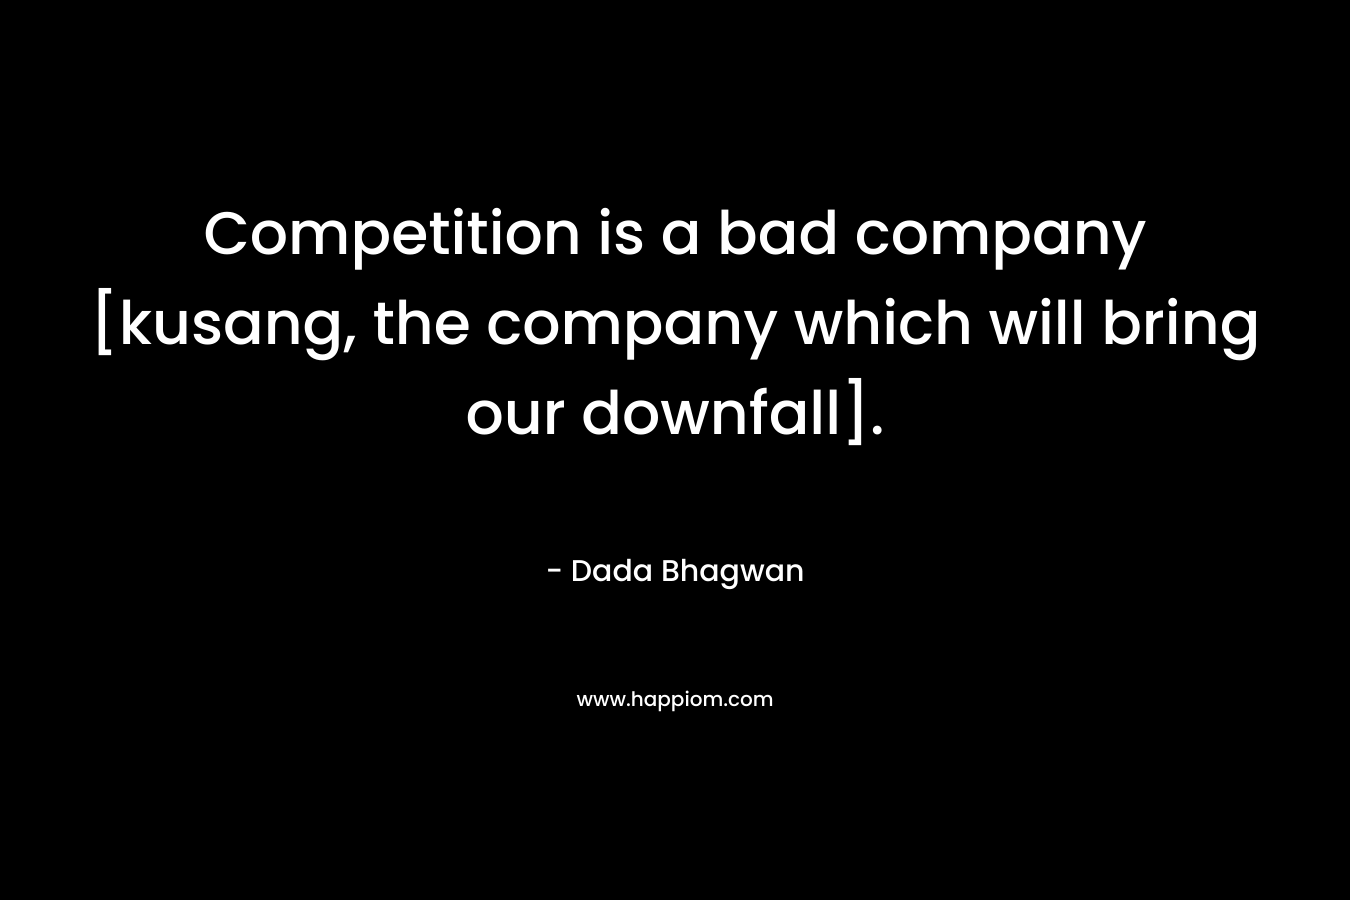 Competition is a bad company [kusang, the company which will bring our downfall].